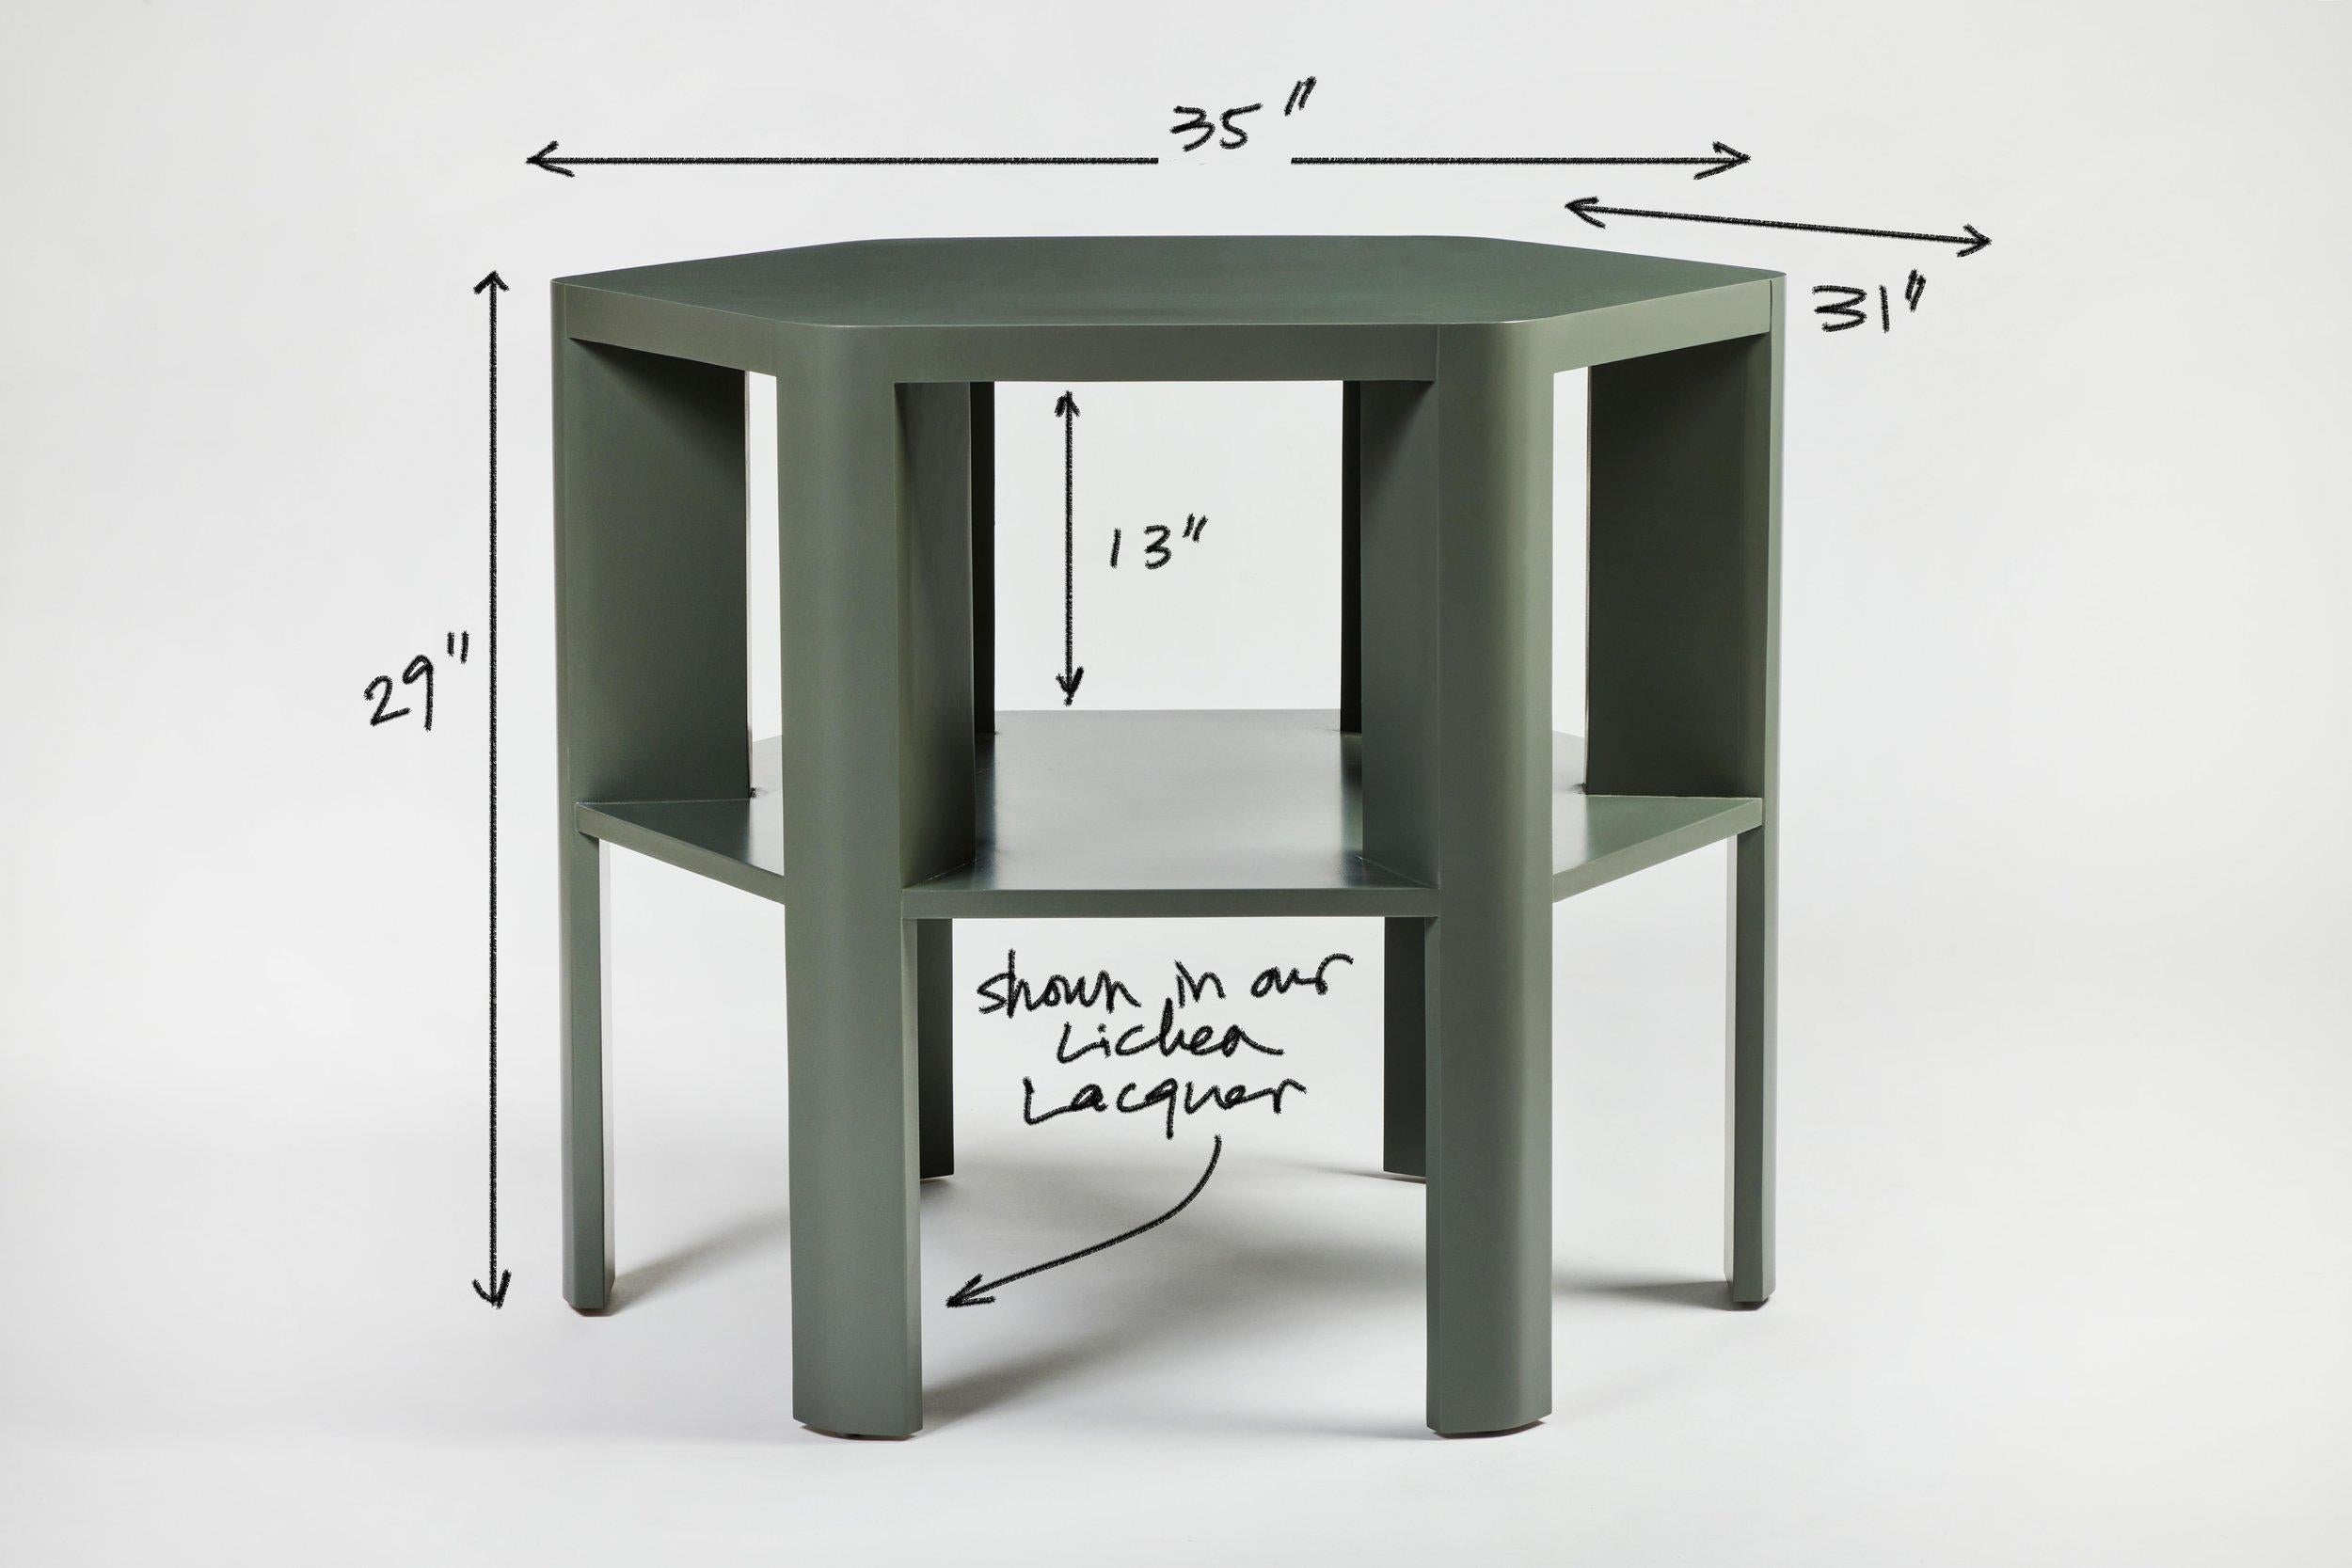 Martin and Brockett's Library Table is a chic work horse. Stripped of unnecessary details, its minimalist design makes this table functional for sober book storage or as an efficient small space bar (bottle storage below frees up the table top for